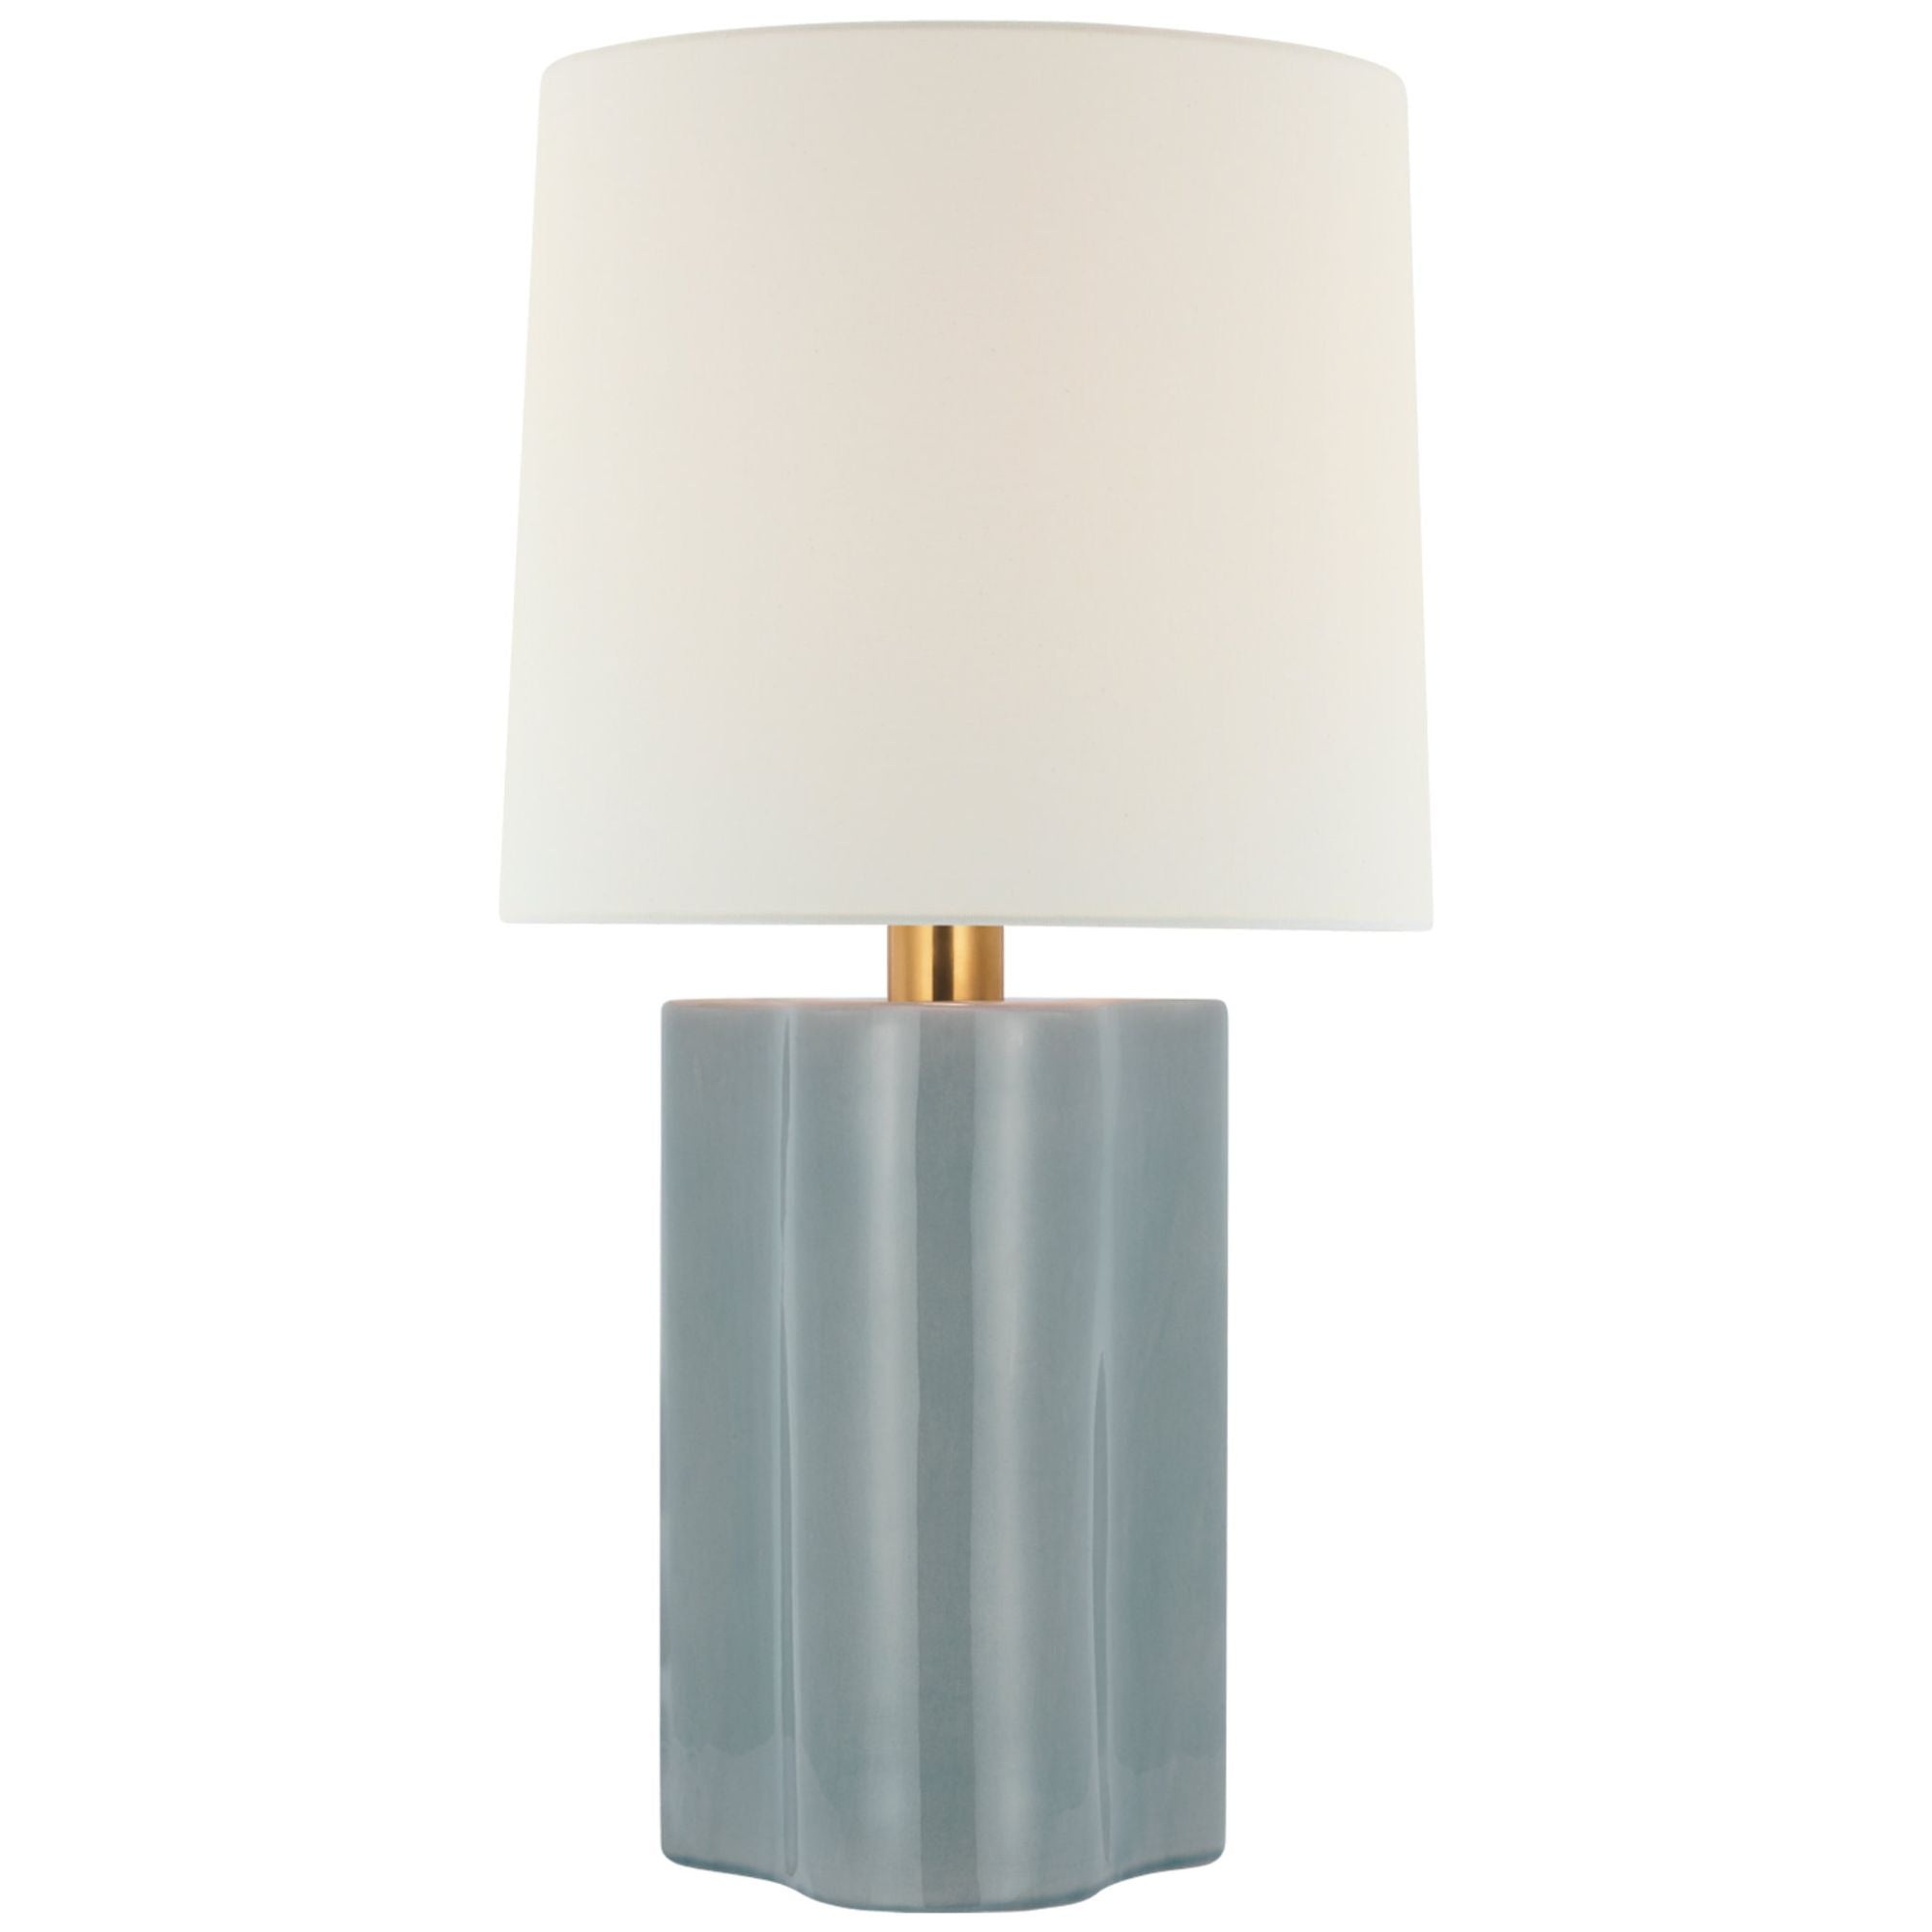 Barbara Barry Lakepoint Large Table Lamp in Sky Gray with Linen Shade